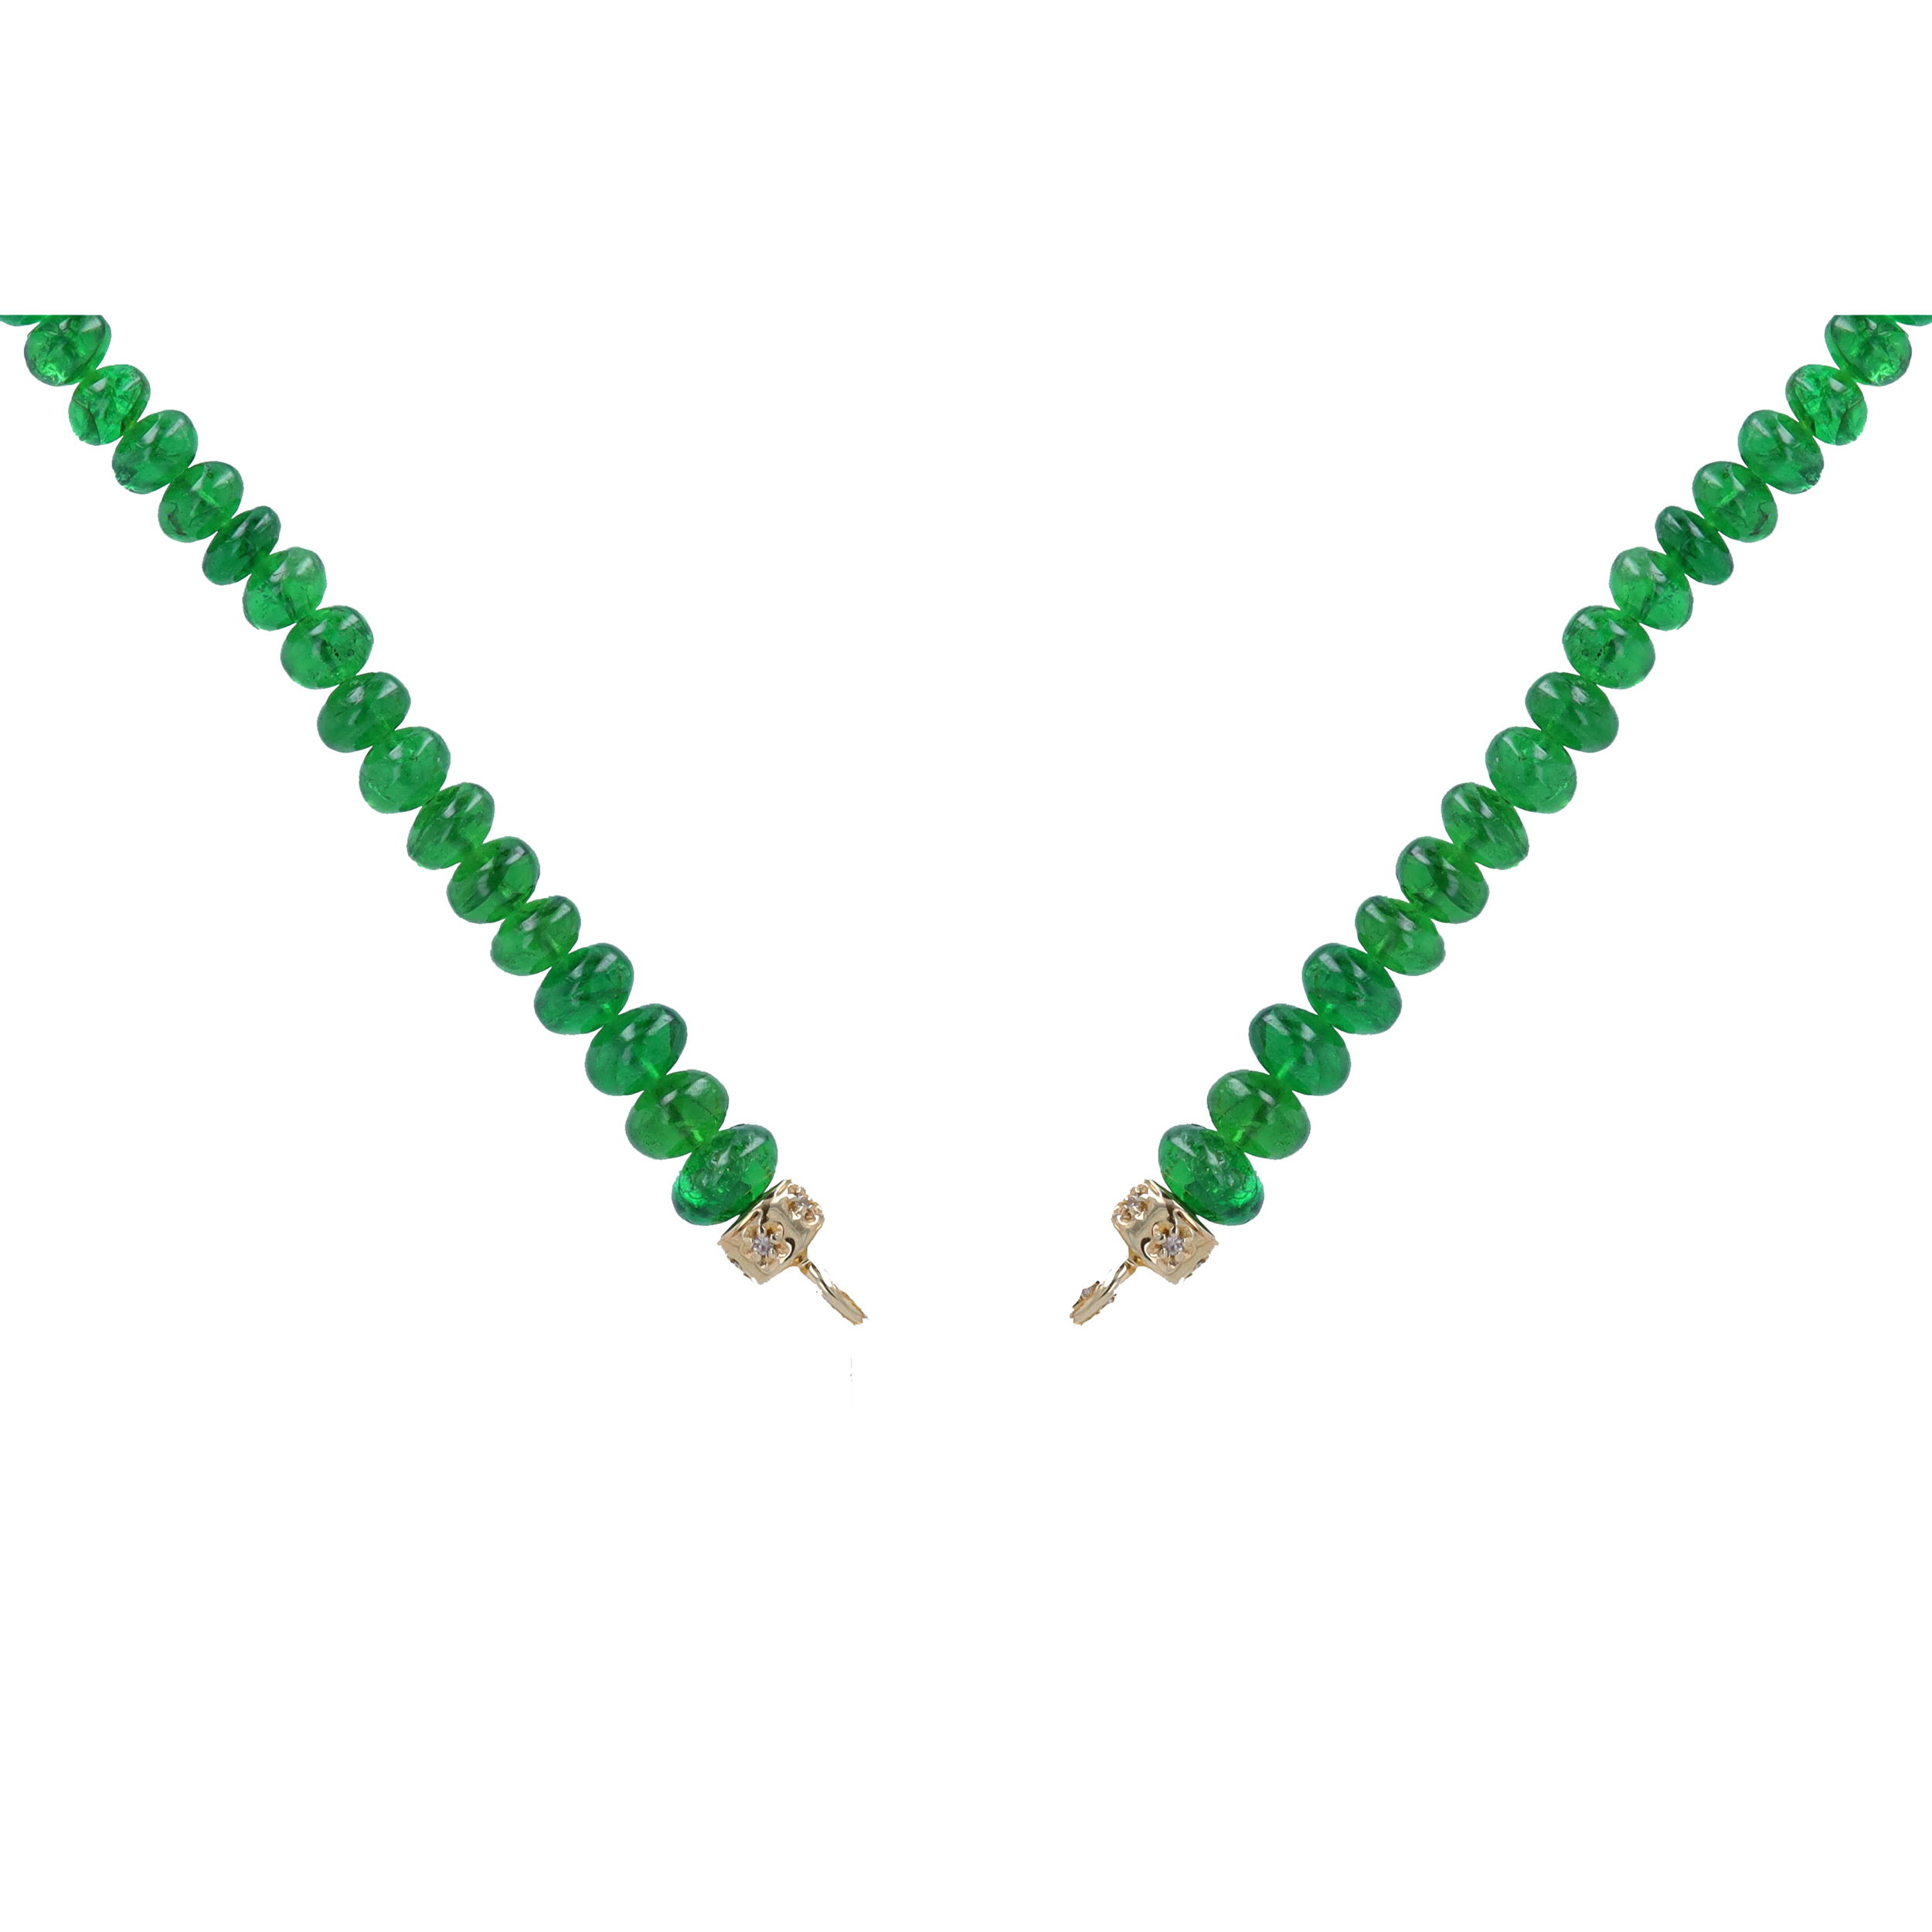 22" ~5mm Hand Polished Translucent Emerald Beaded Chain With 14k Gold Extension, and end Caps with Without Openable Bale